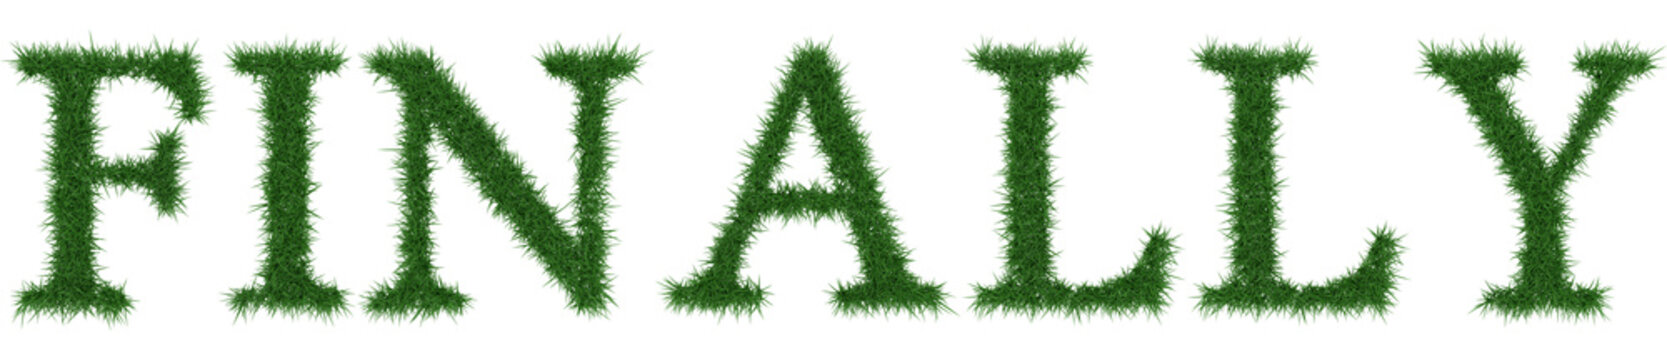 Finally - 3D rendering fresh Grass letters isolated on whhite background.